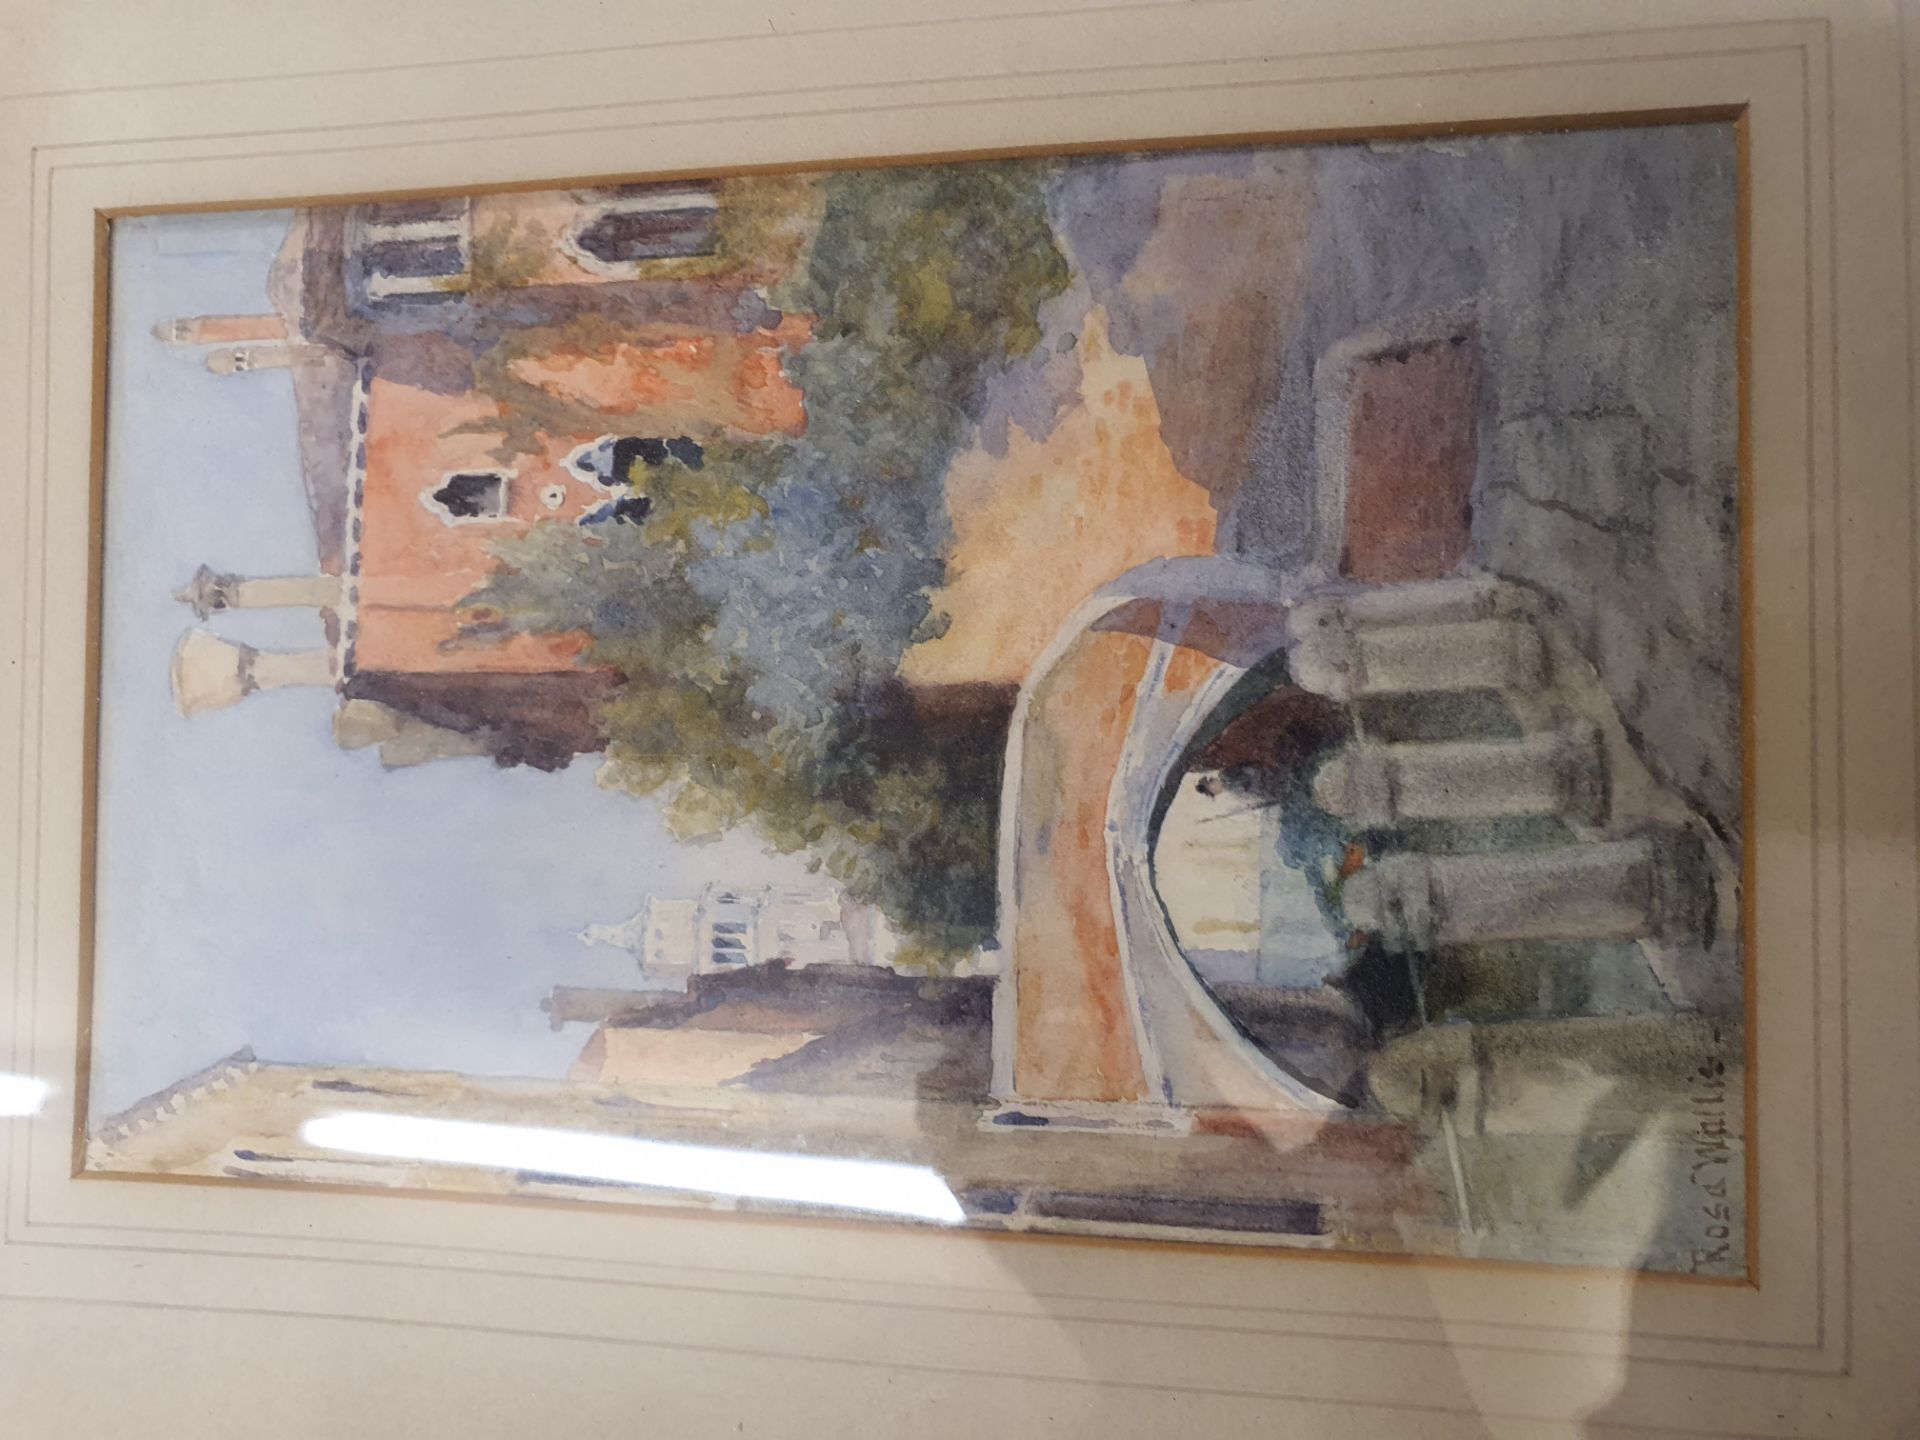 No VAT Grade U Two Gilt Framed Prints - One Of Countyside Scene And One Canal Scene